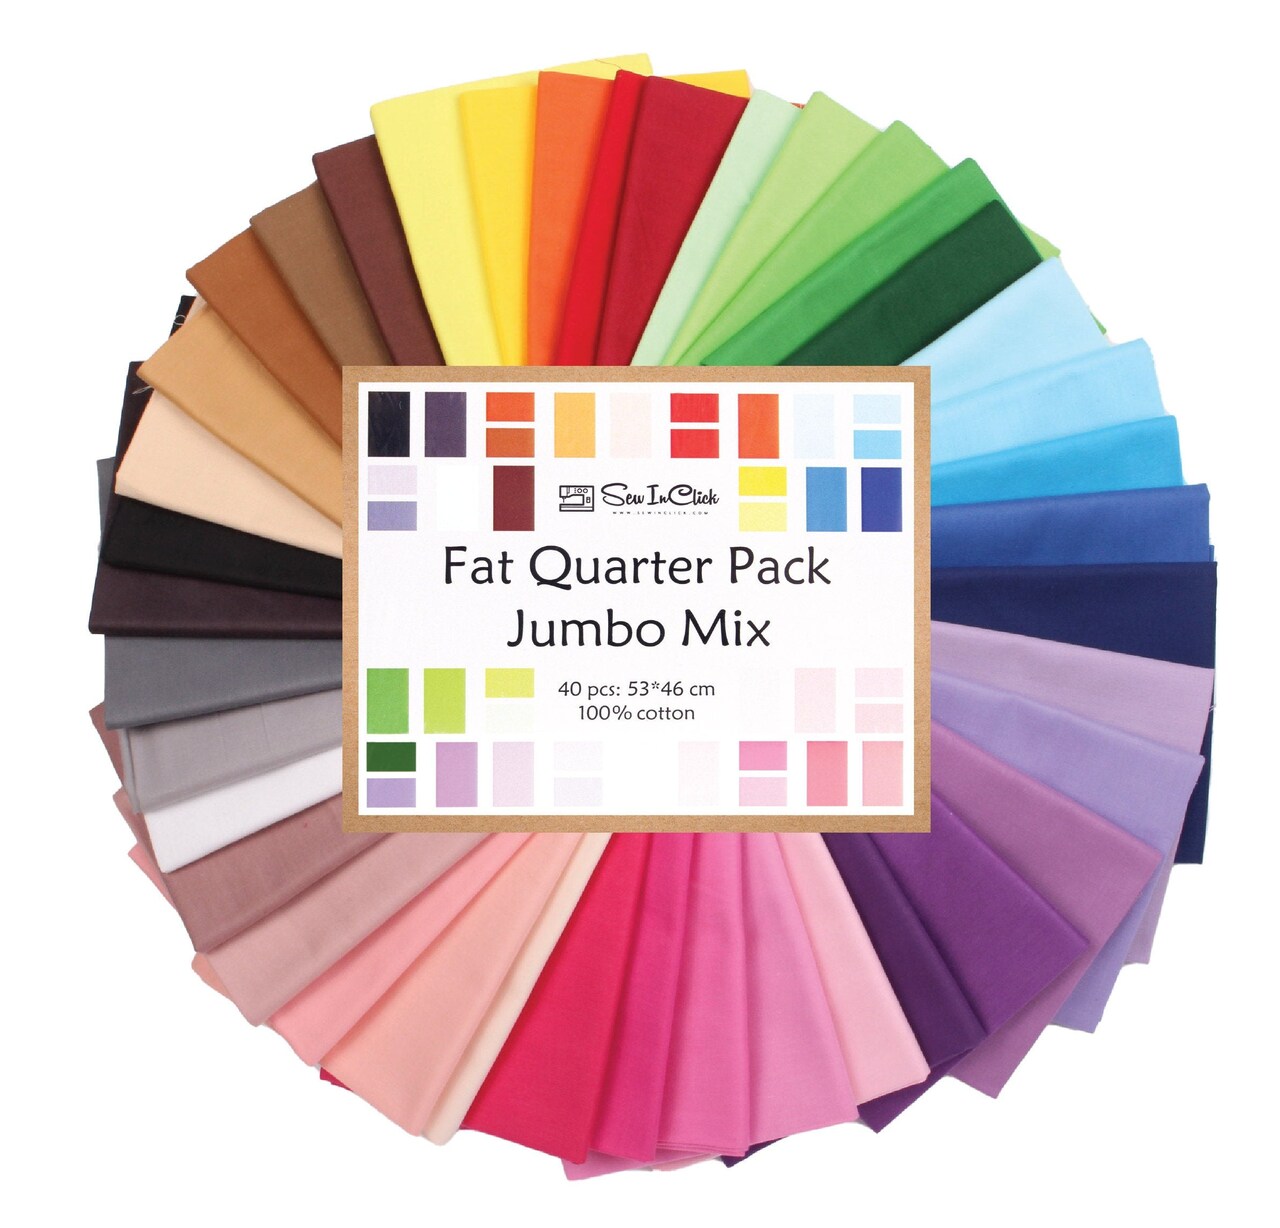 40 Fat Quarter Bundle -100% Cotton, Pure Solids, Colorful Mix - 40 Colors, Quilting & Crafting Soft Fabric, Special Jumbo Gift Bundle